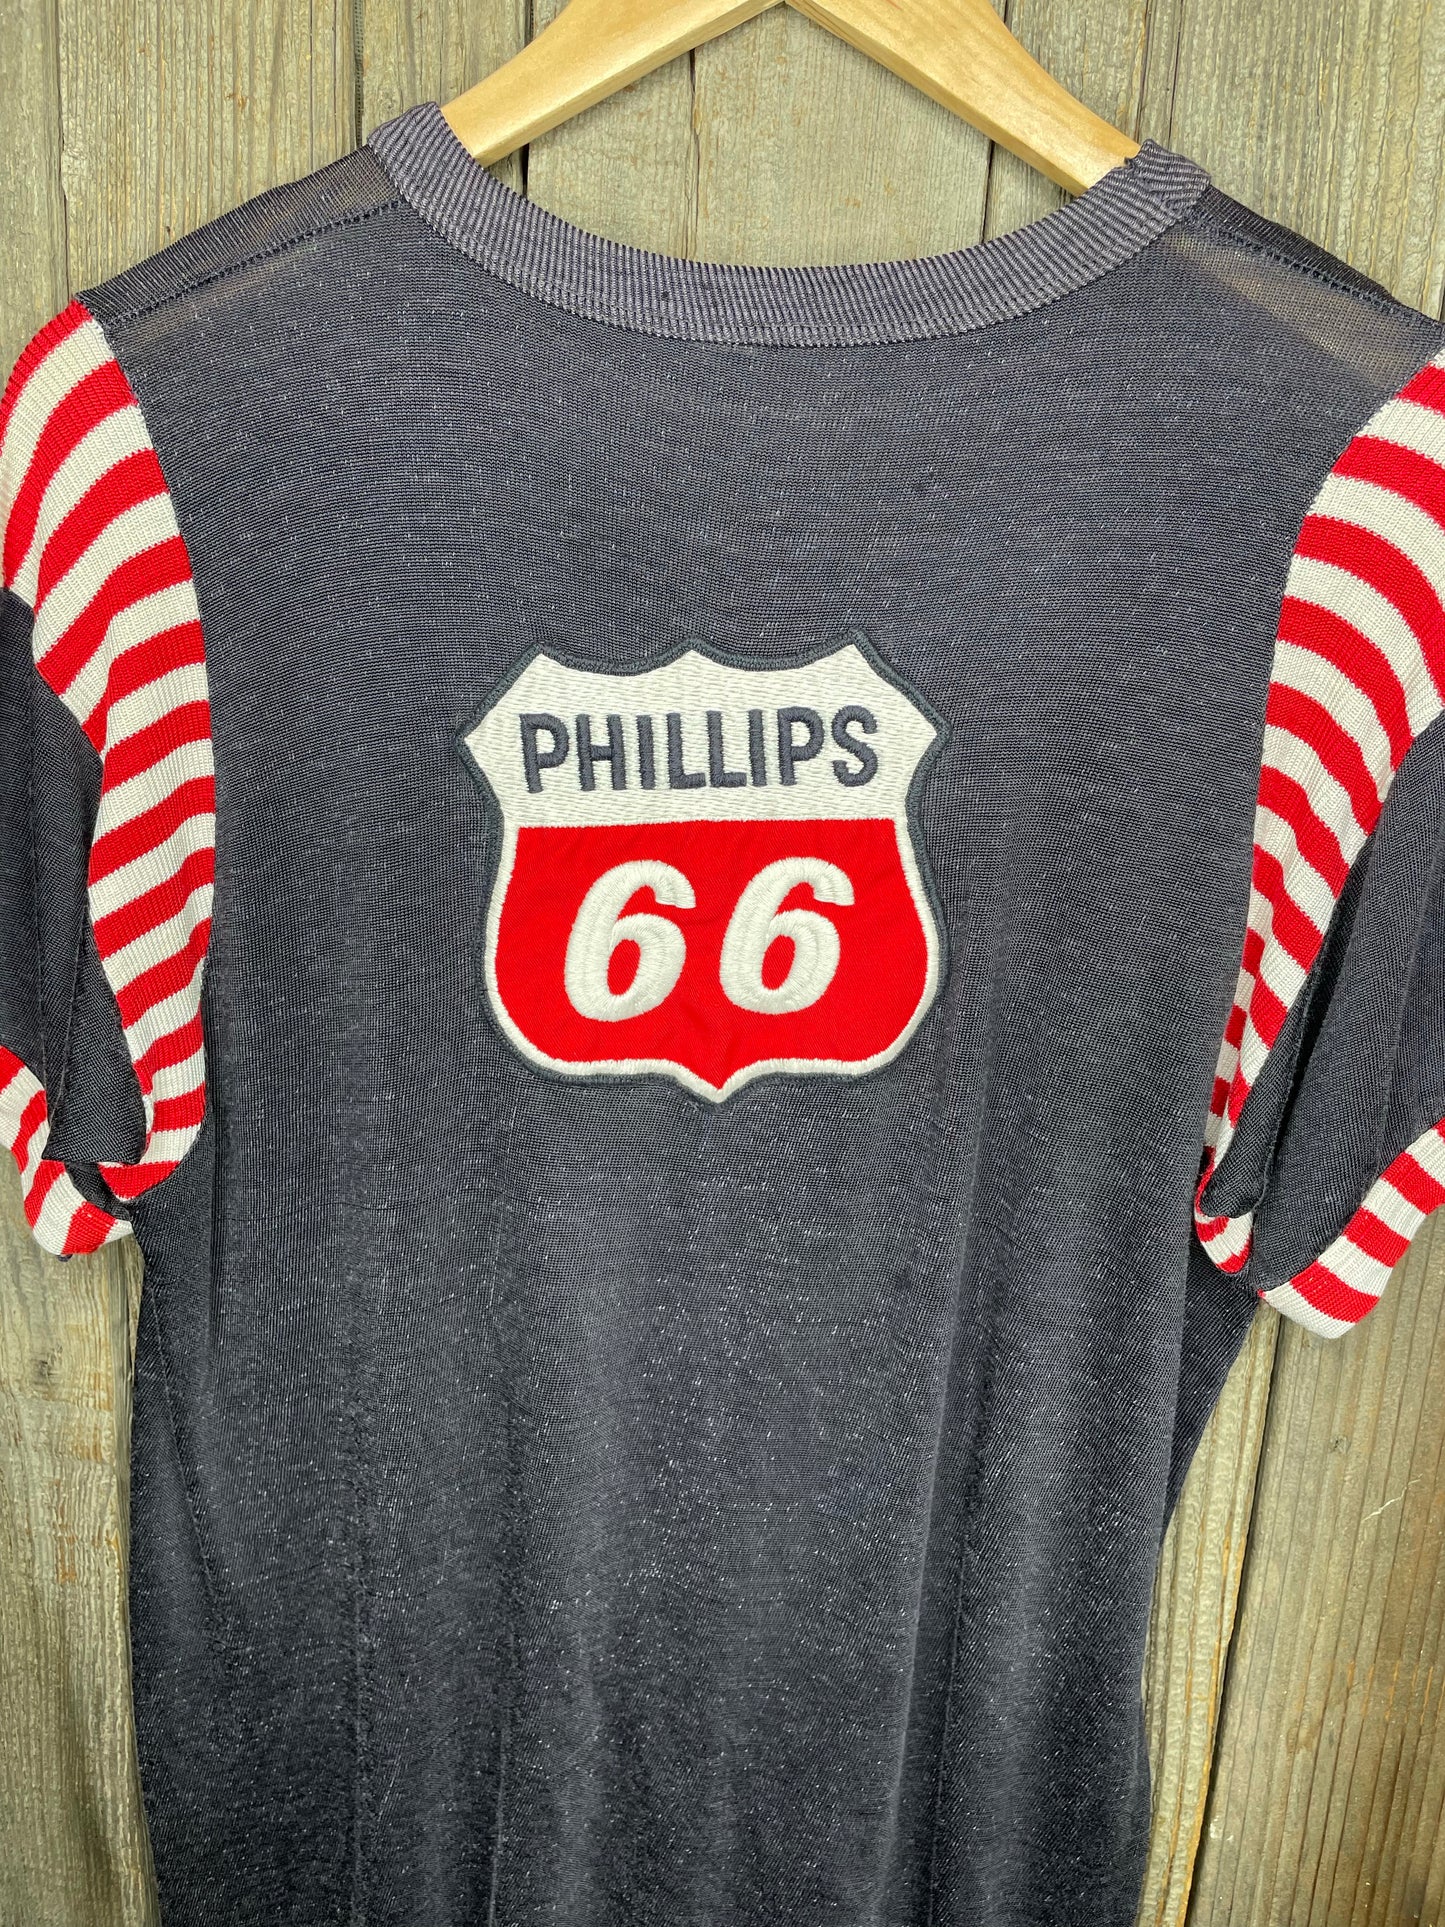 vintage 60s Phillips 66 jersey black red and white